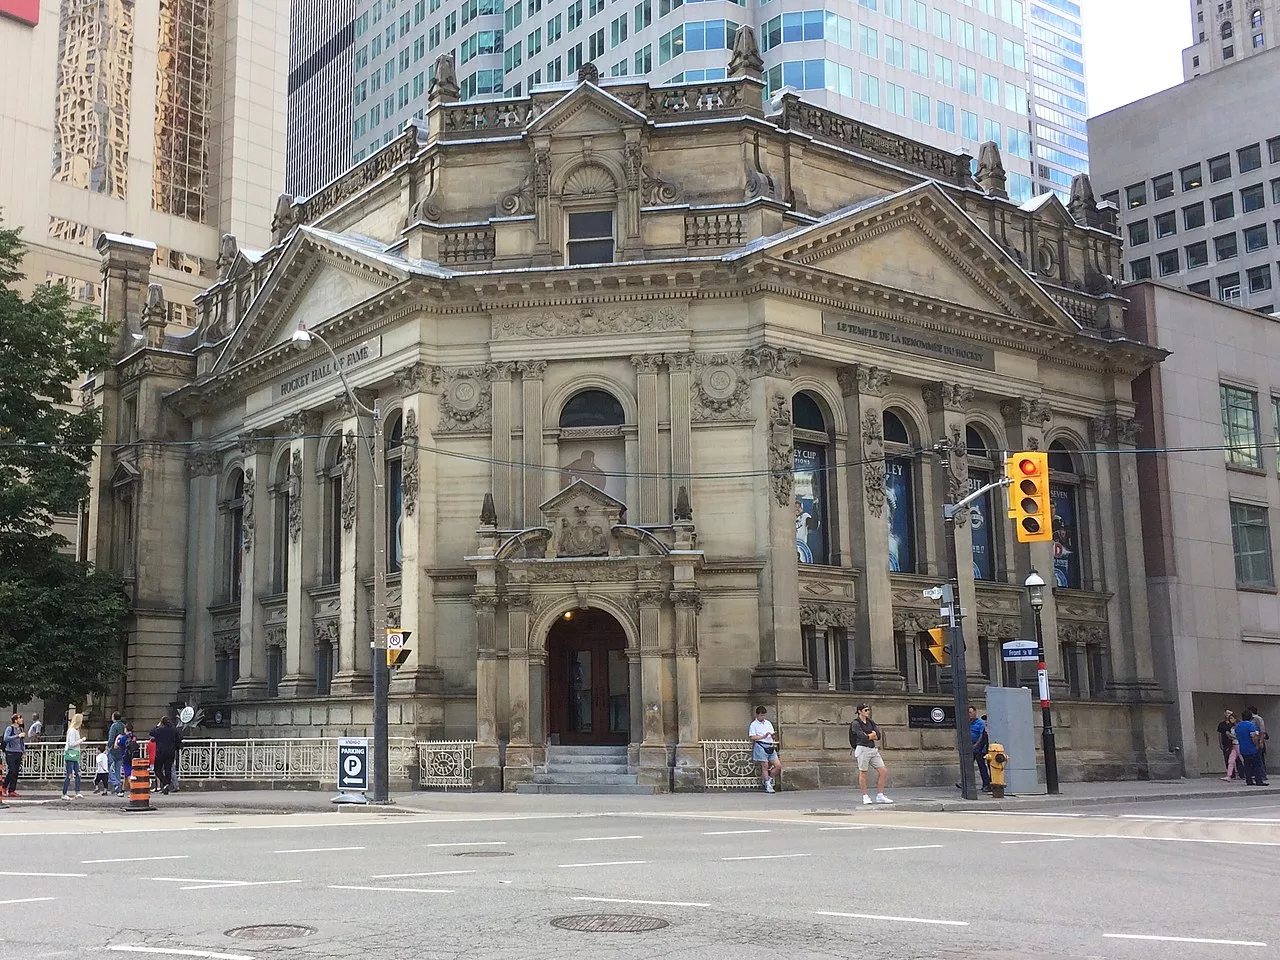 Hockey Hall of Fame in Canada, North America | Museums,Hockey - Rated 4.6